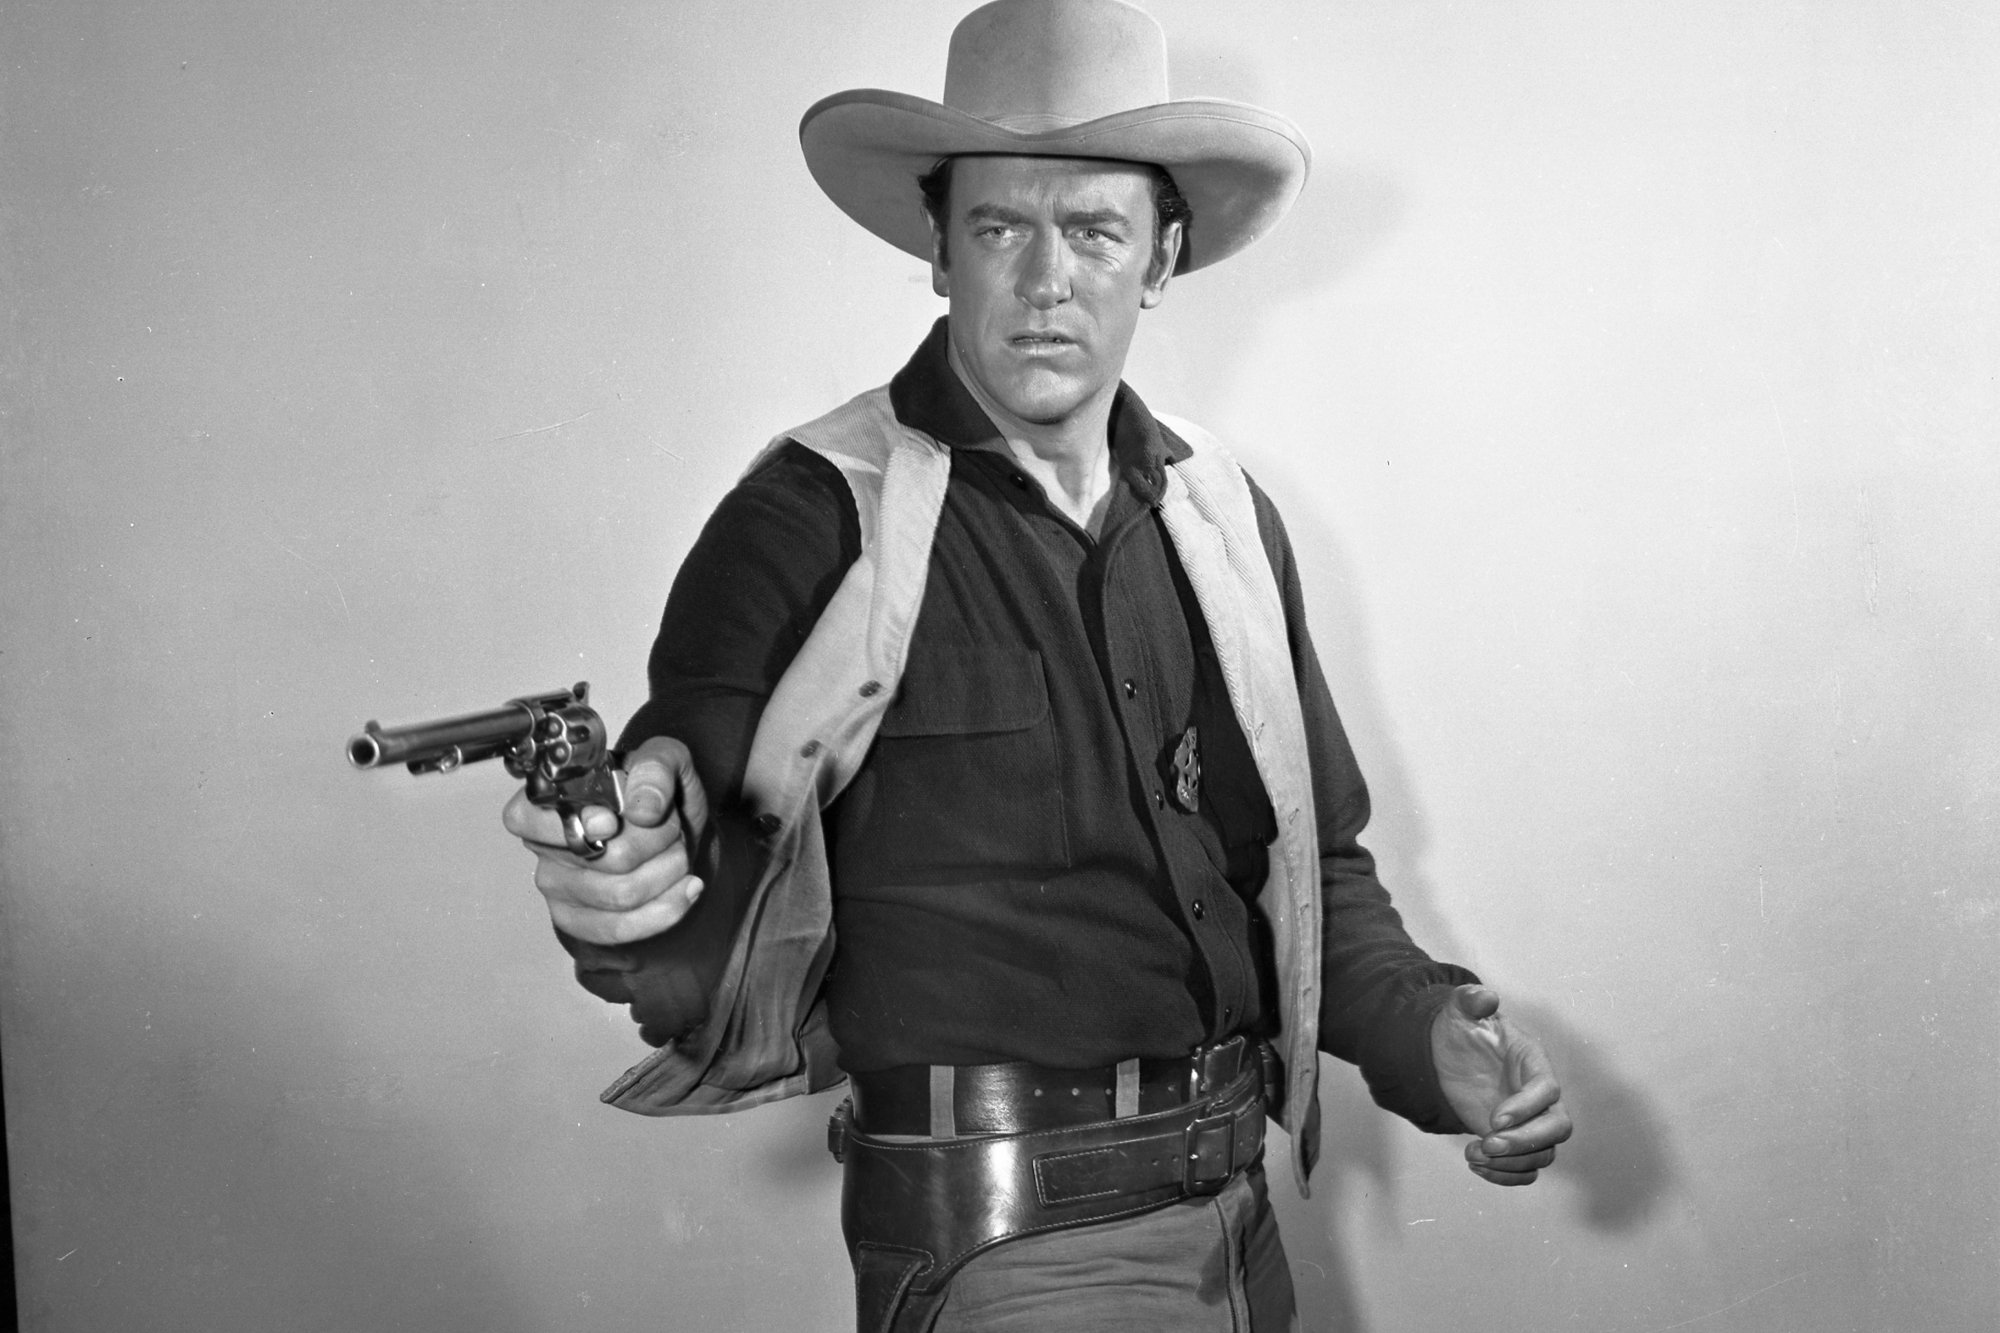 'Gunsmoke' James Arness as Matt Dillon in a black-and-white picture in his Western uniform, holding out his gun